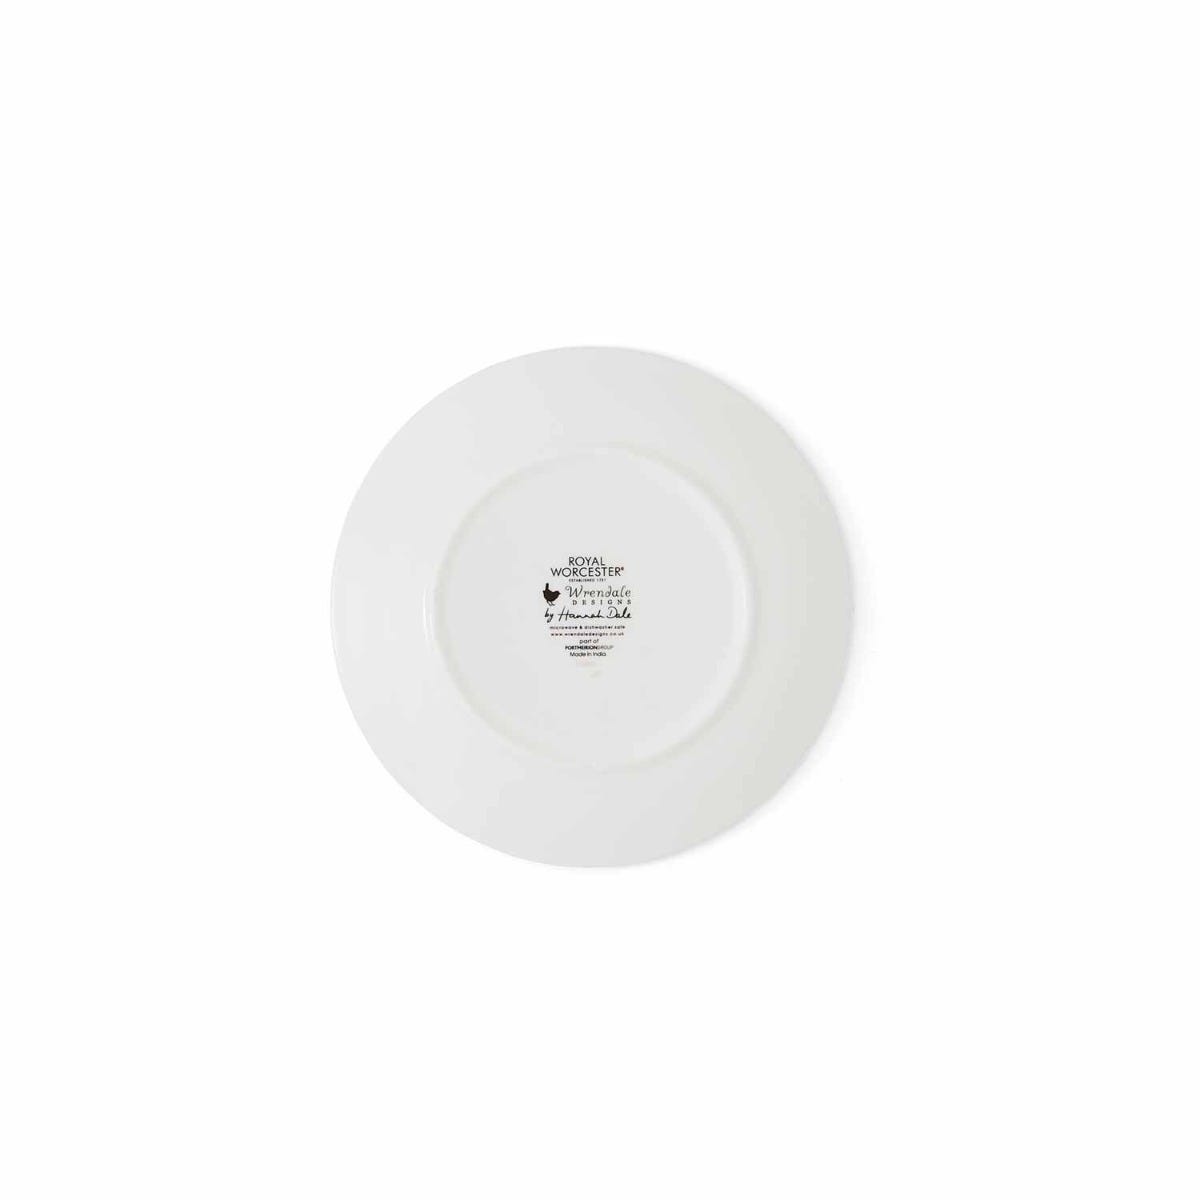 Wrendale Designs Fox & Hare Coupe Side Plates